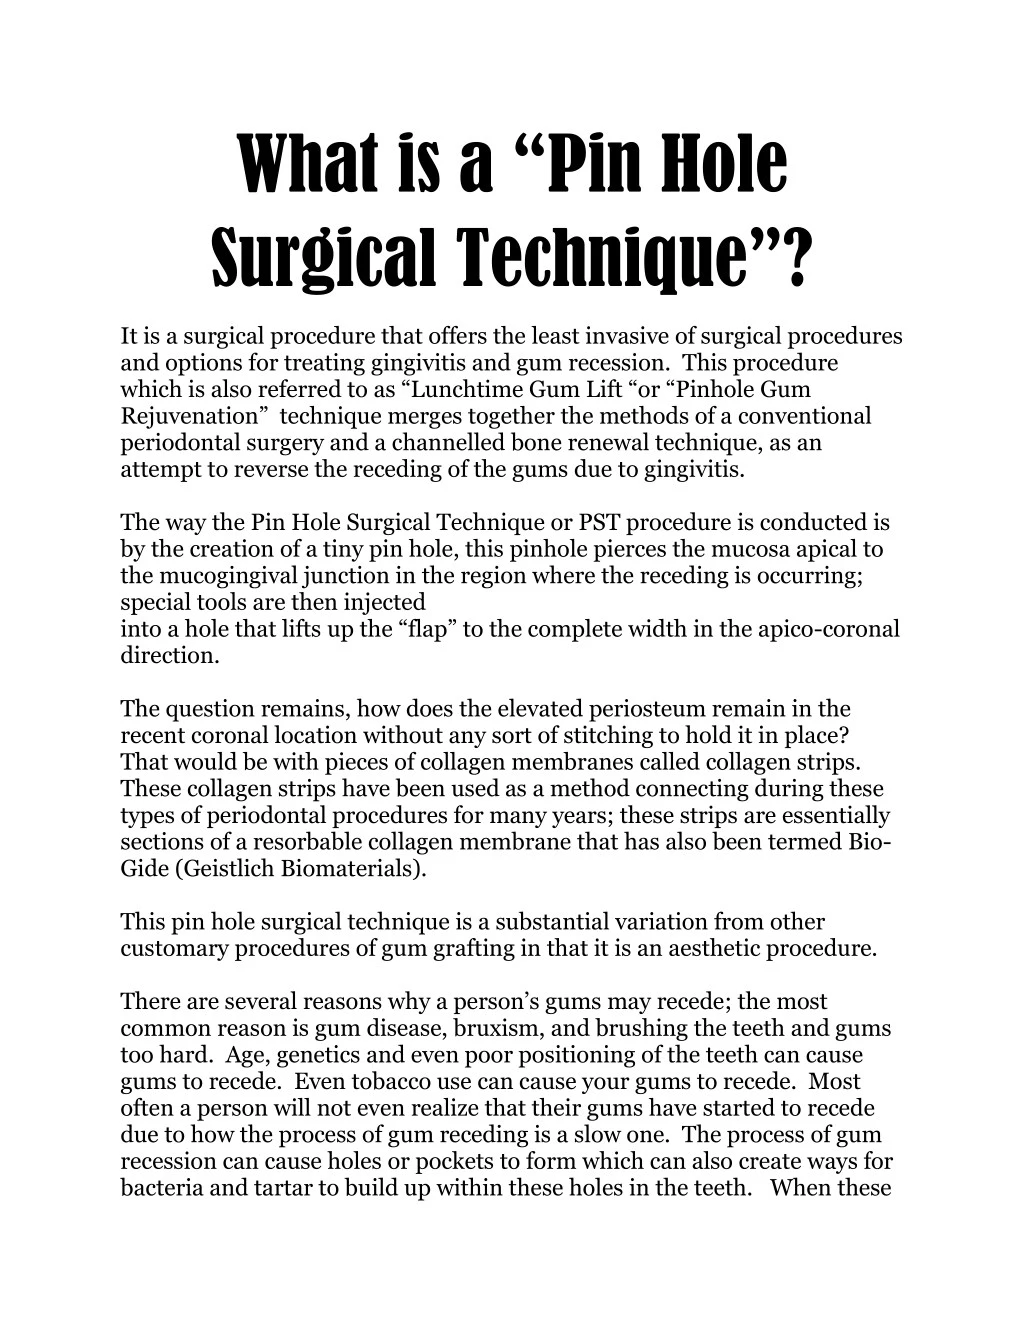 what is a pin hole surgical technique